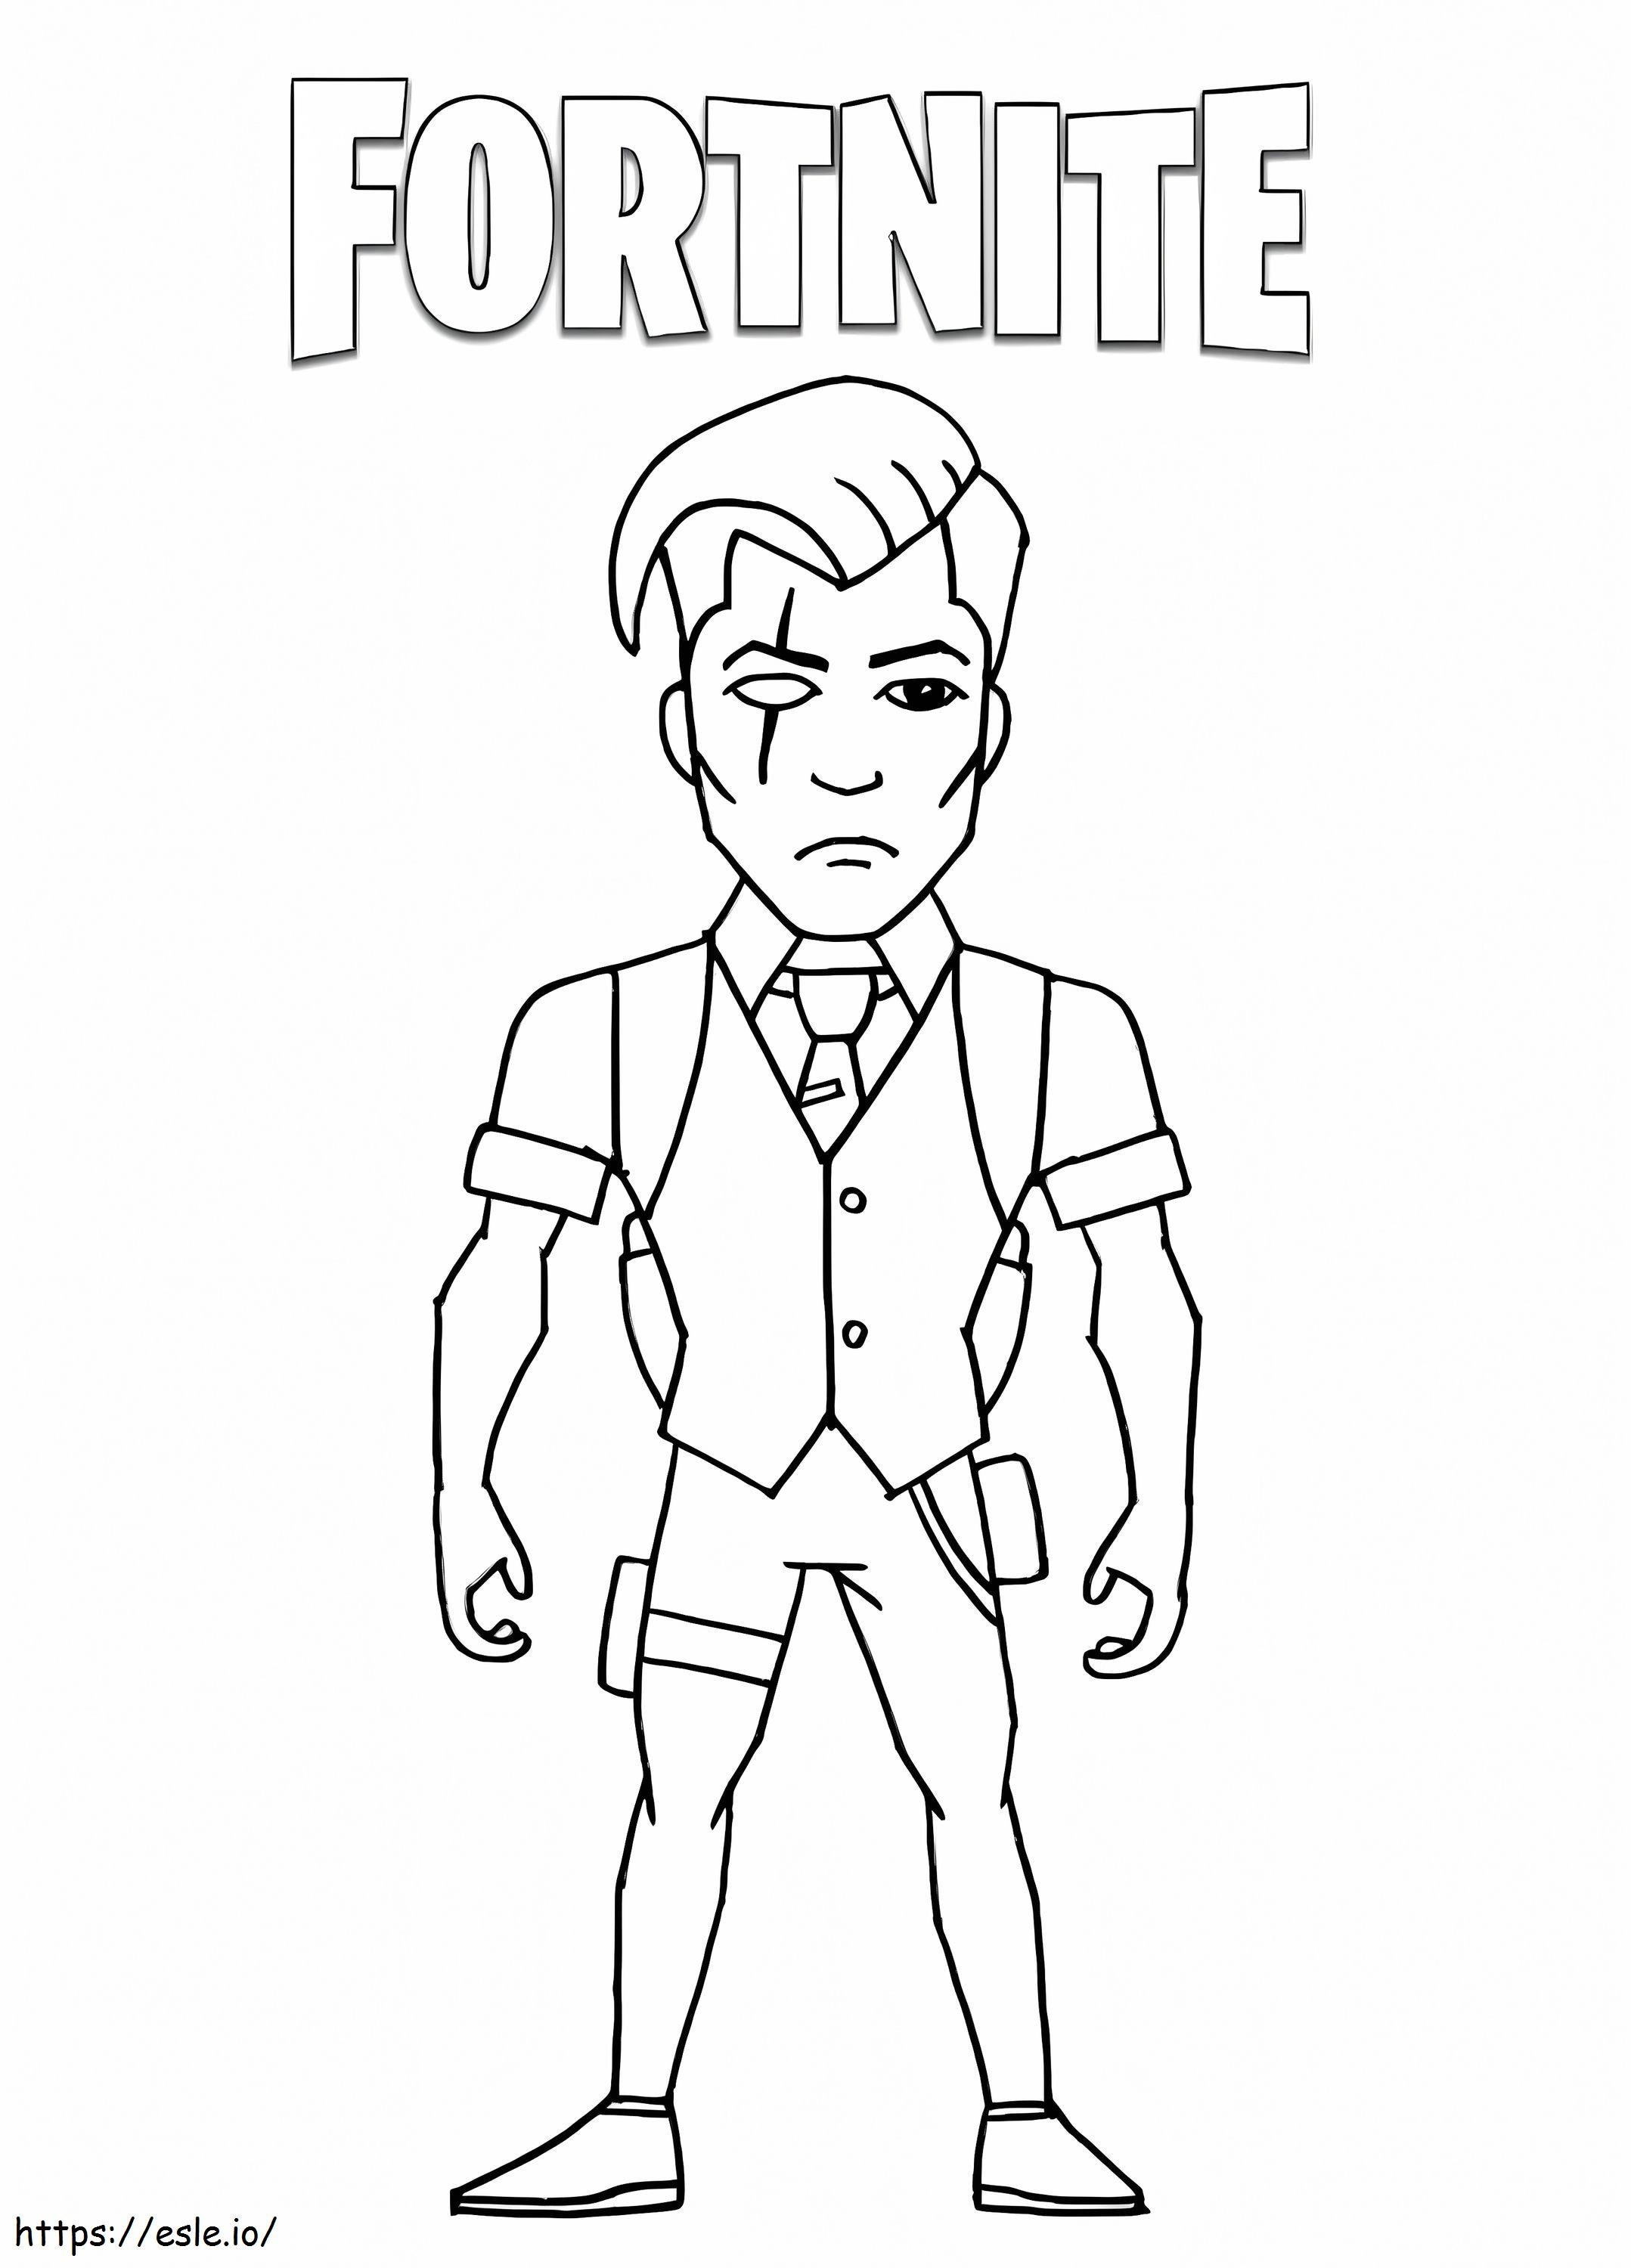 Midas Fortnite coloring page